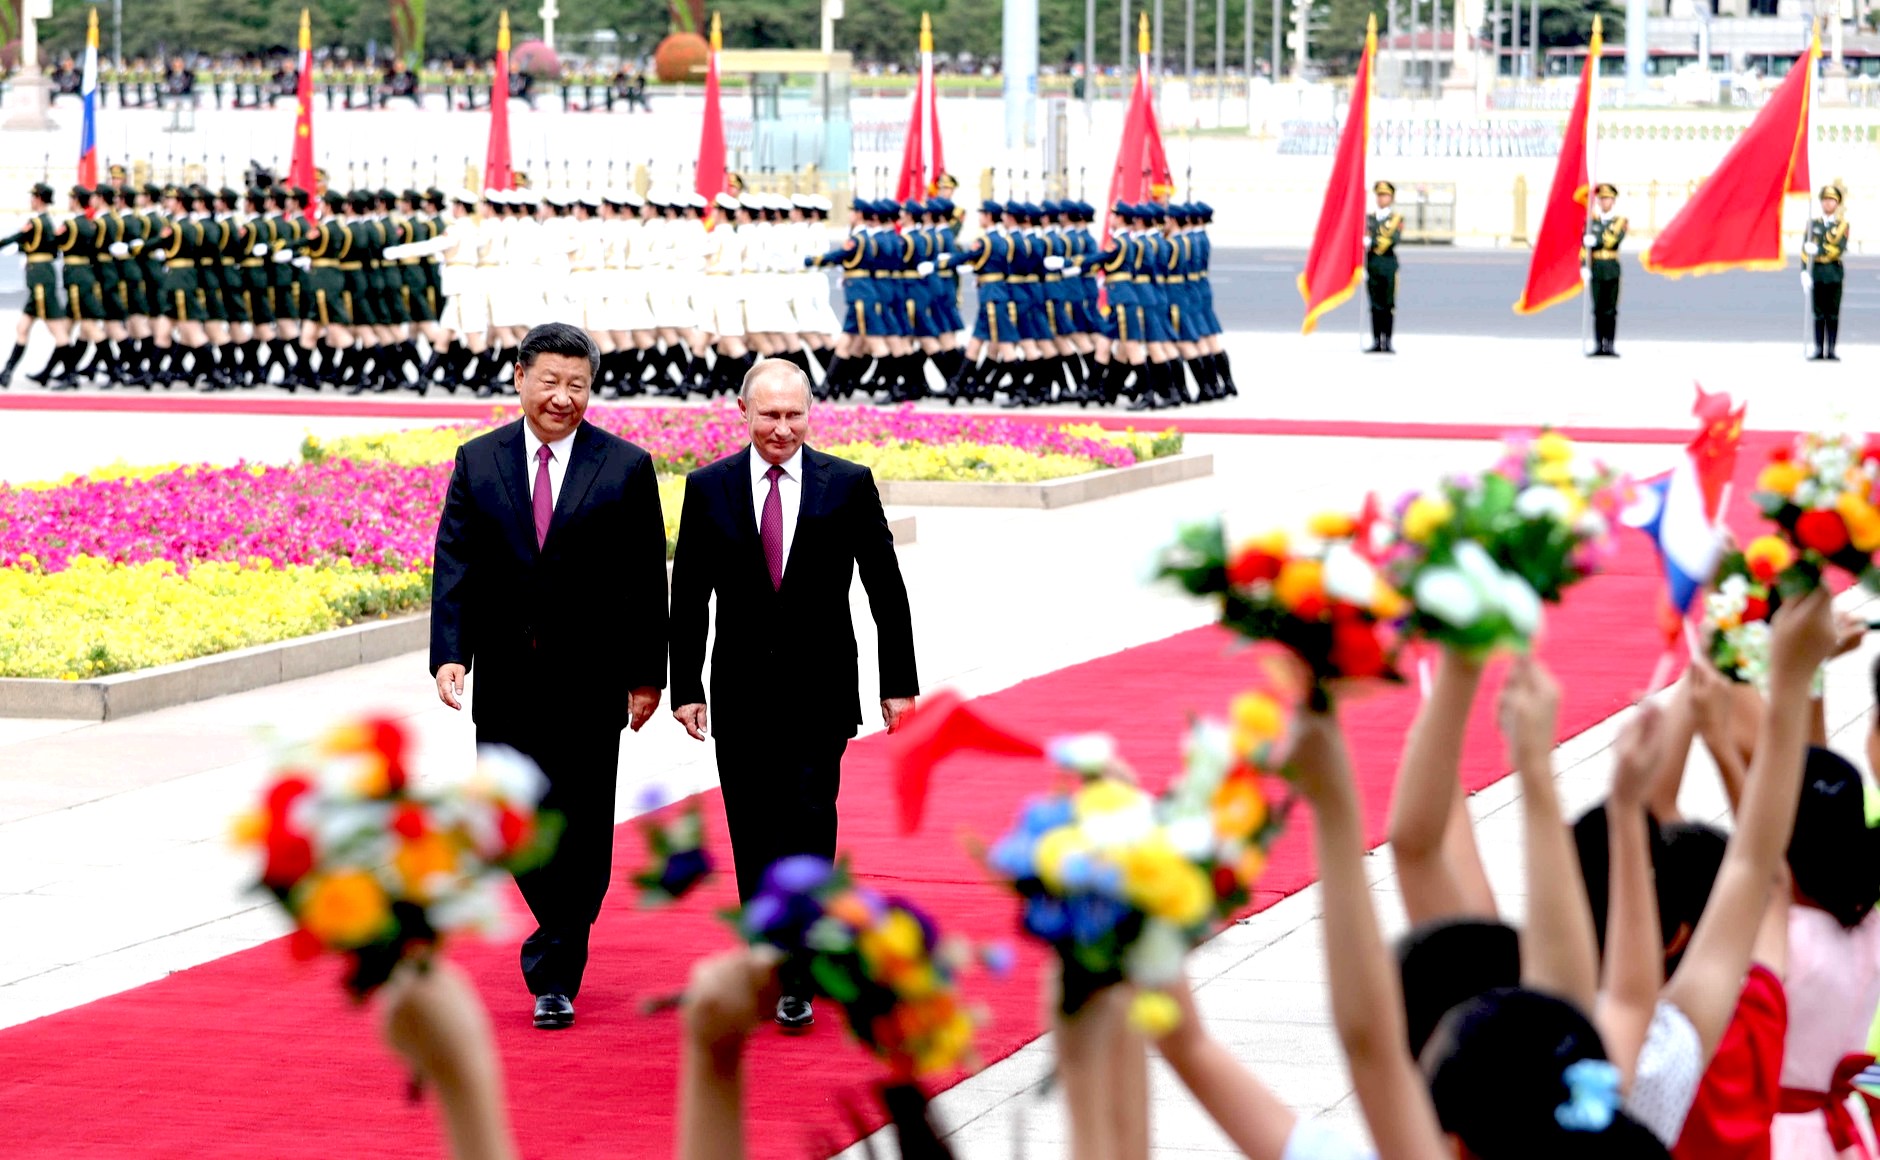 China’s President Xi Jinping and Vladimir Putin during welcoming reception for the Russian president in Beijing, June 2018. (Kremlin.ru, CC BY 4.0, Wikimedia Commons)